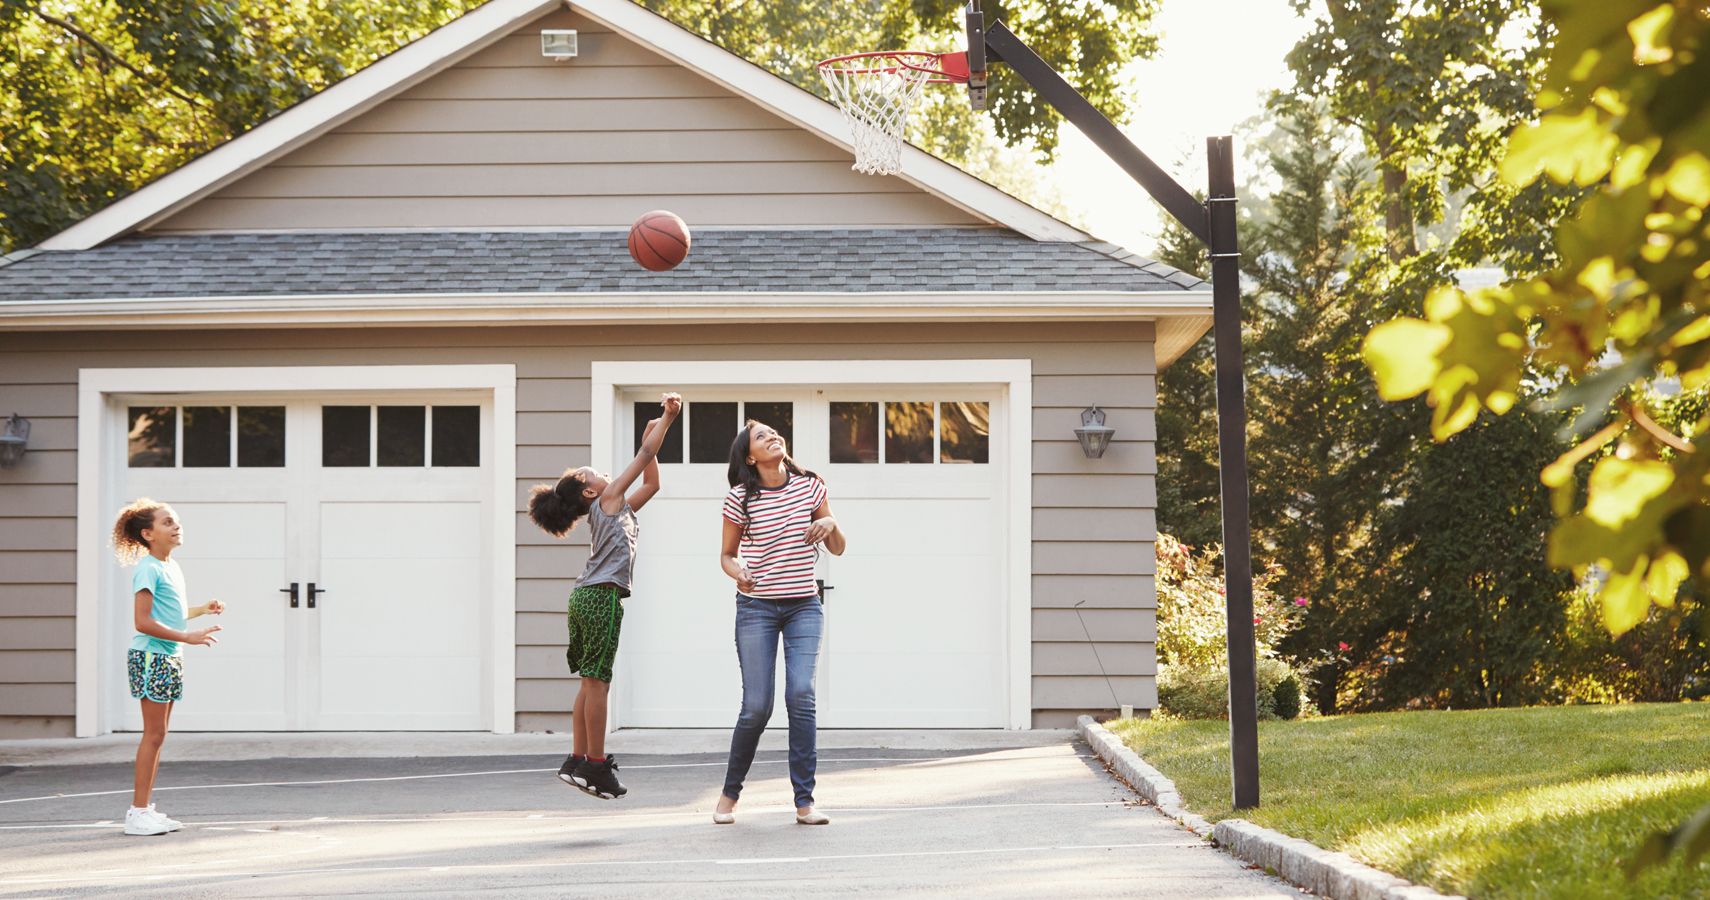 Keeping Kids Safe With Driveway Safety For Parents